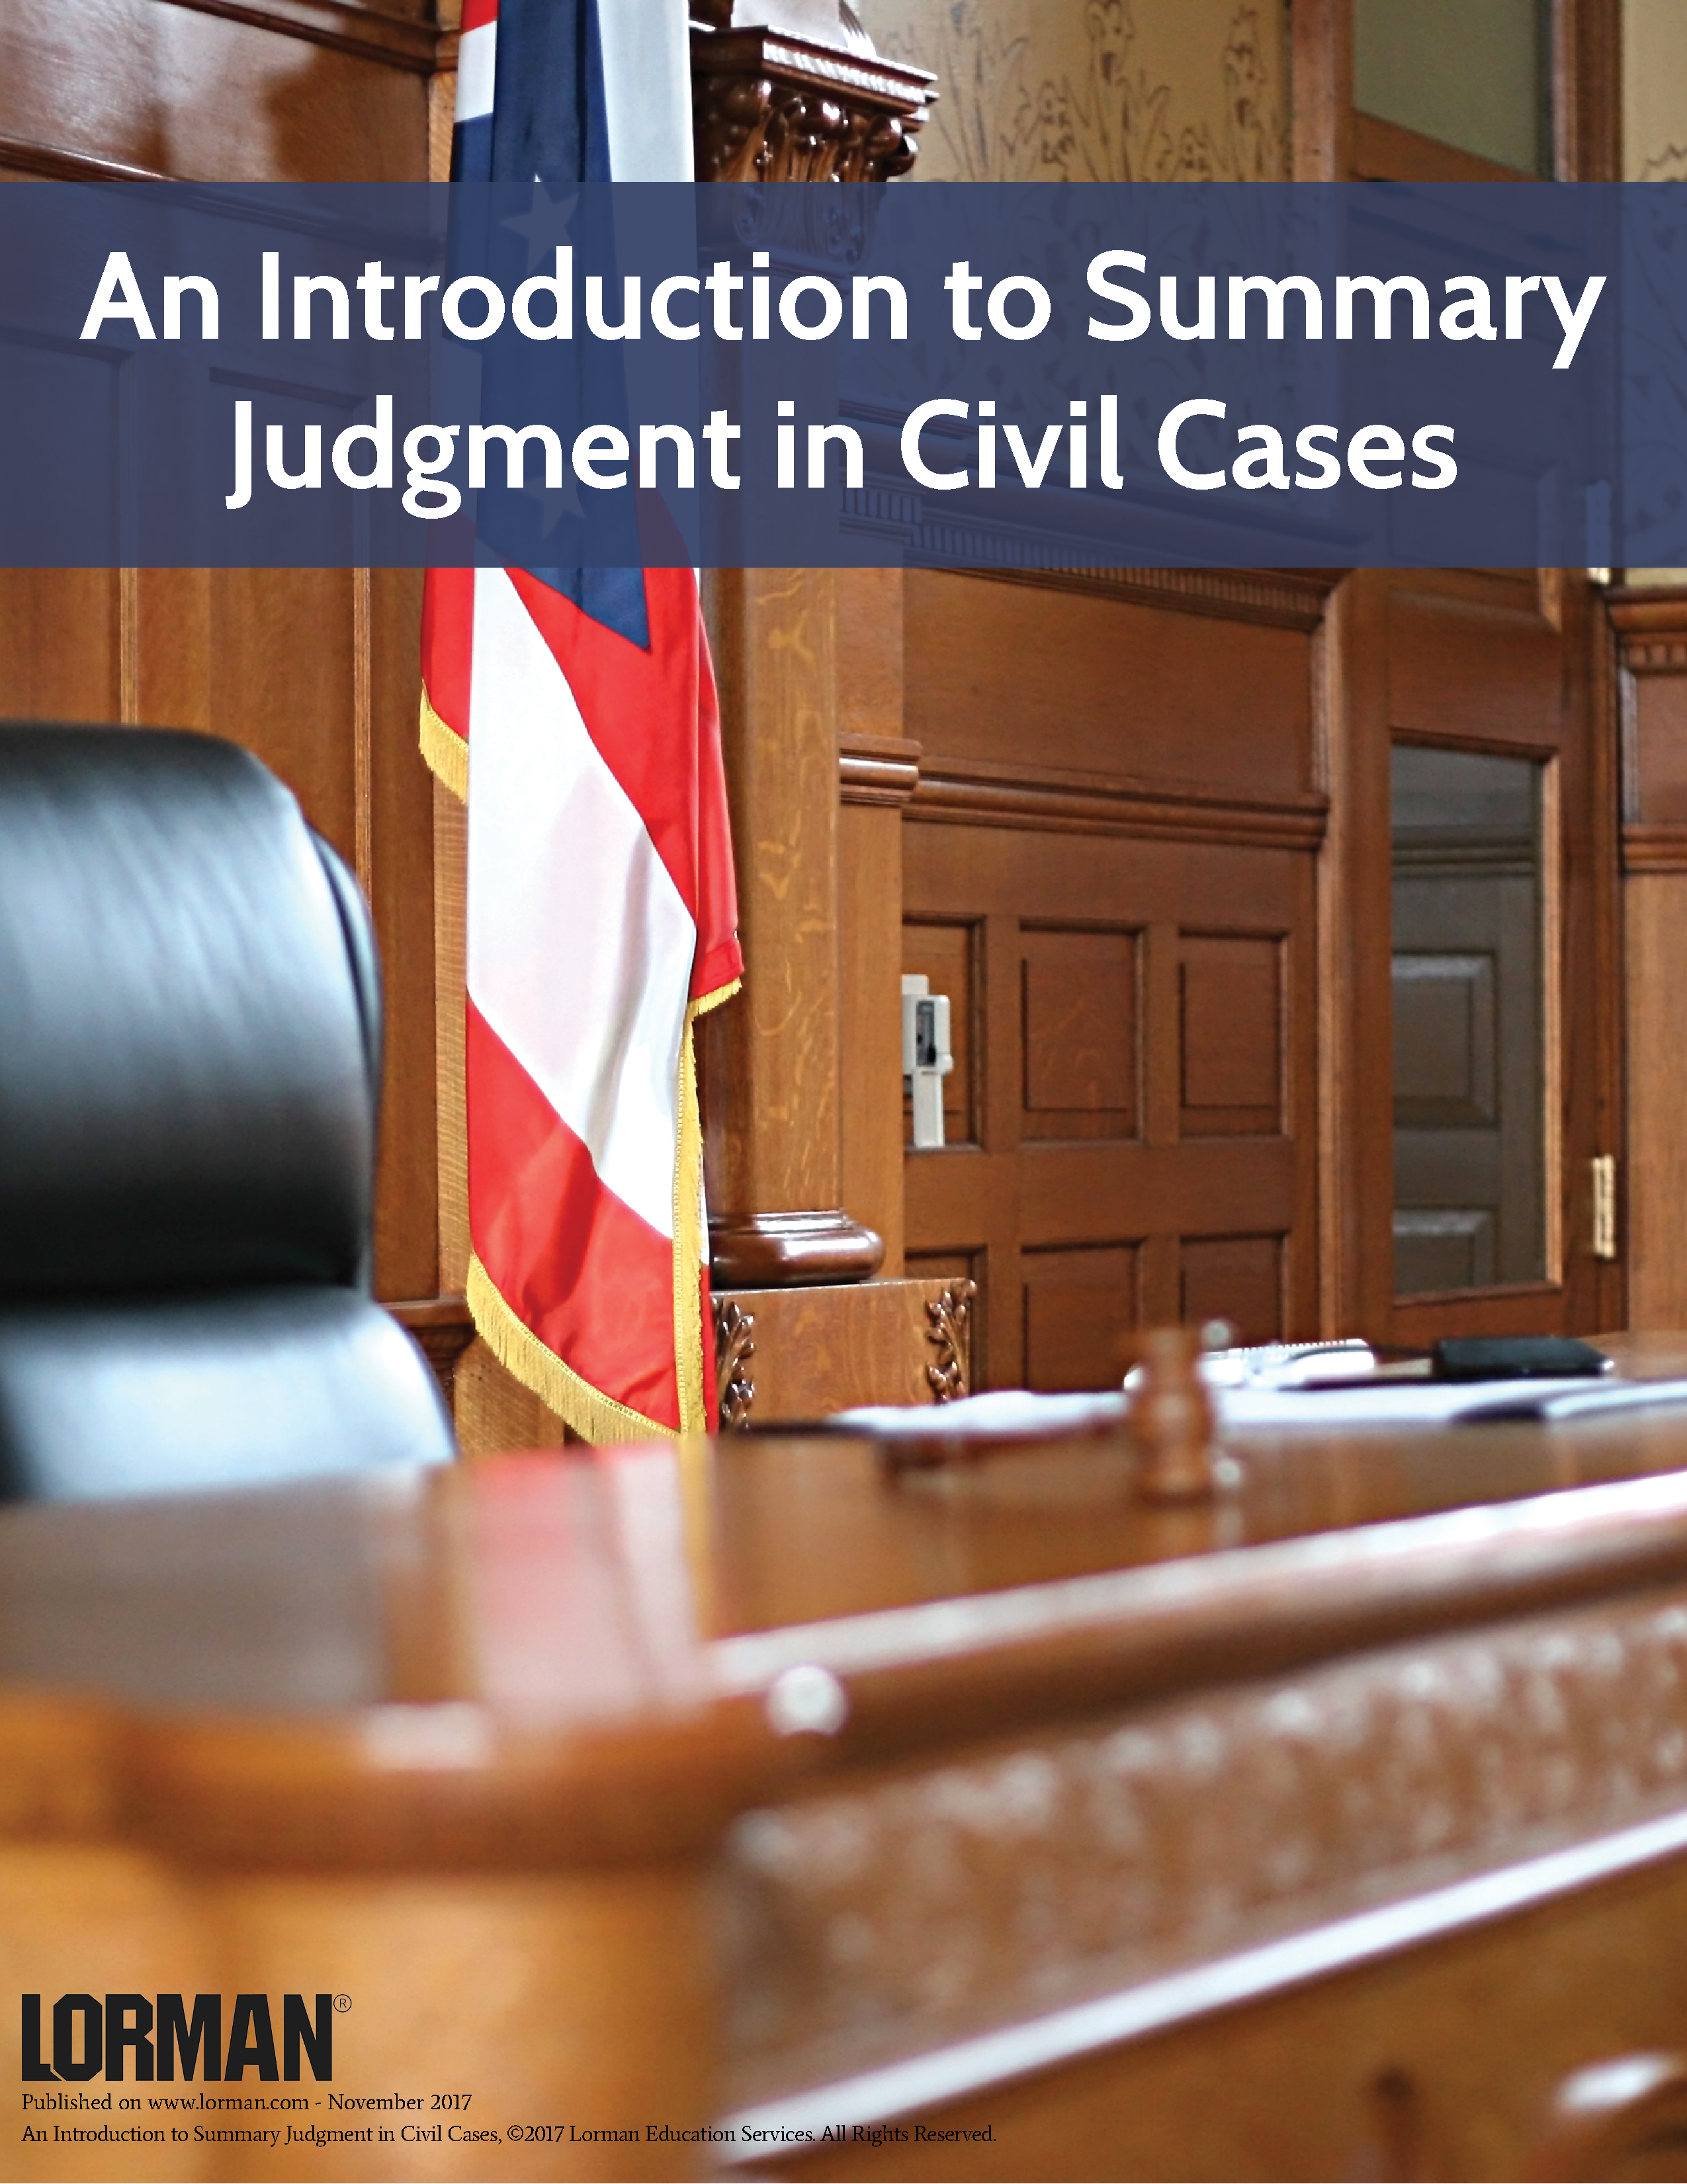 An Introduction to Summary Judgment in Civil Cases